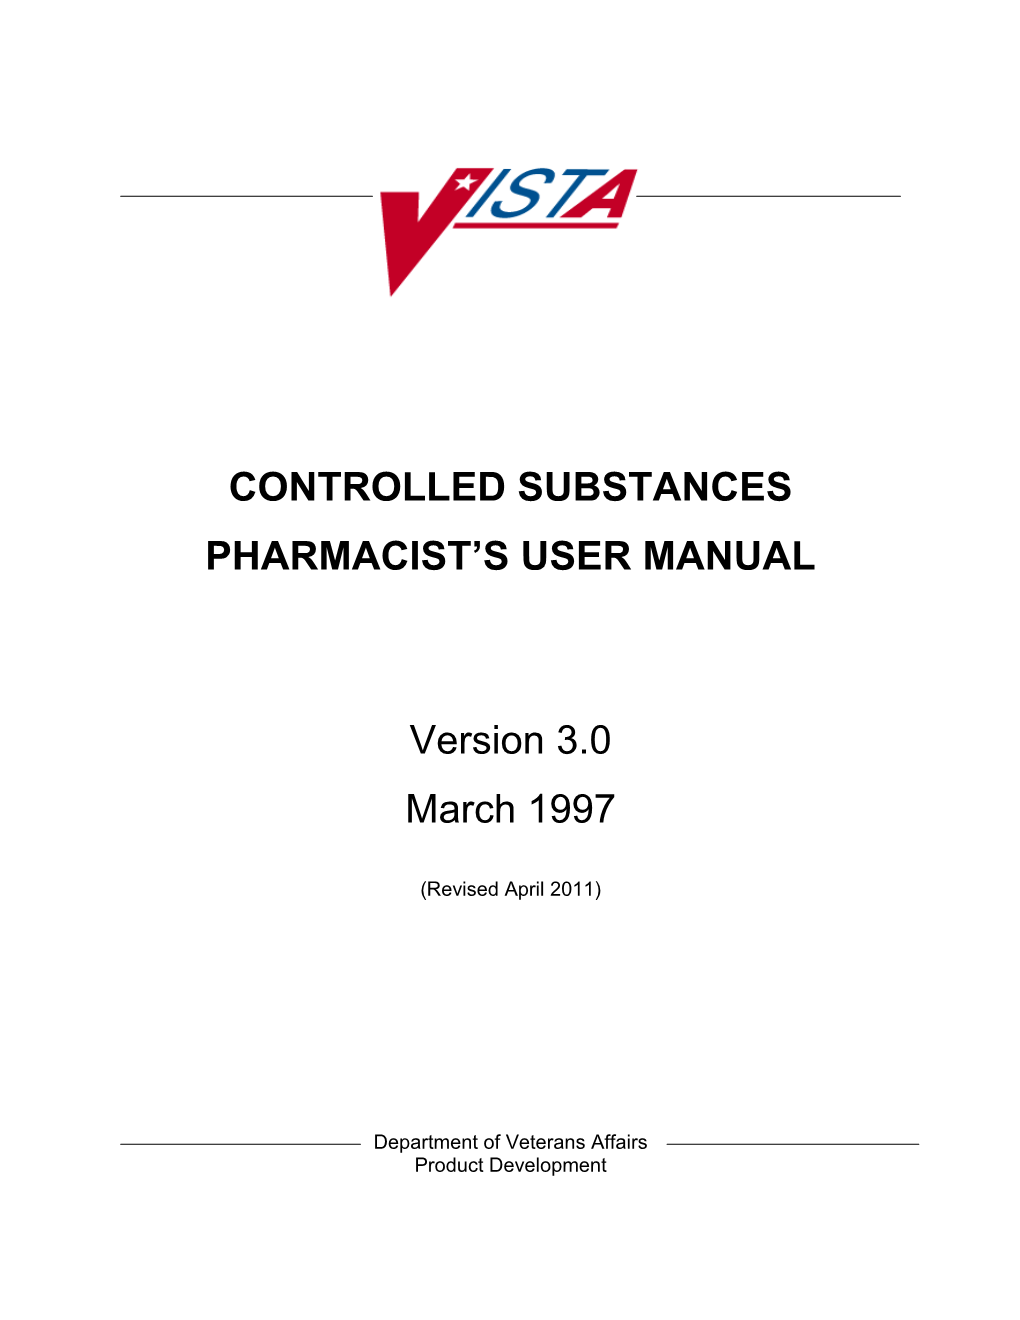 Department of Veterans Affairs Controlled Substances Pharmacist's User Manual